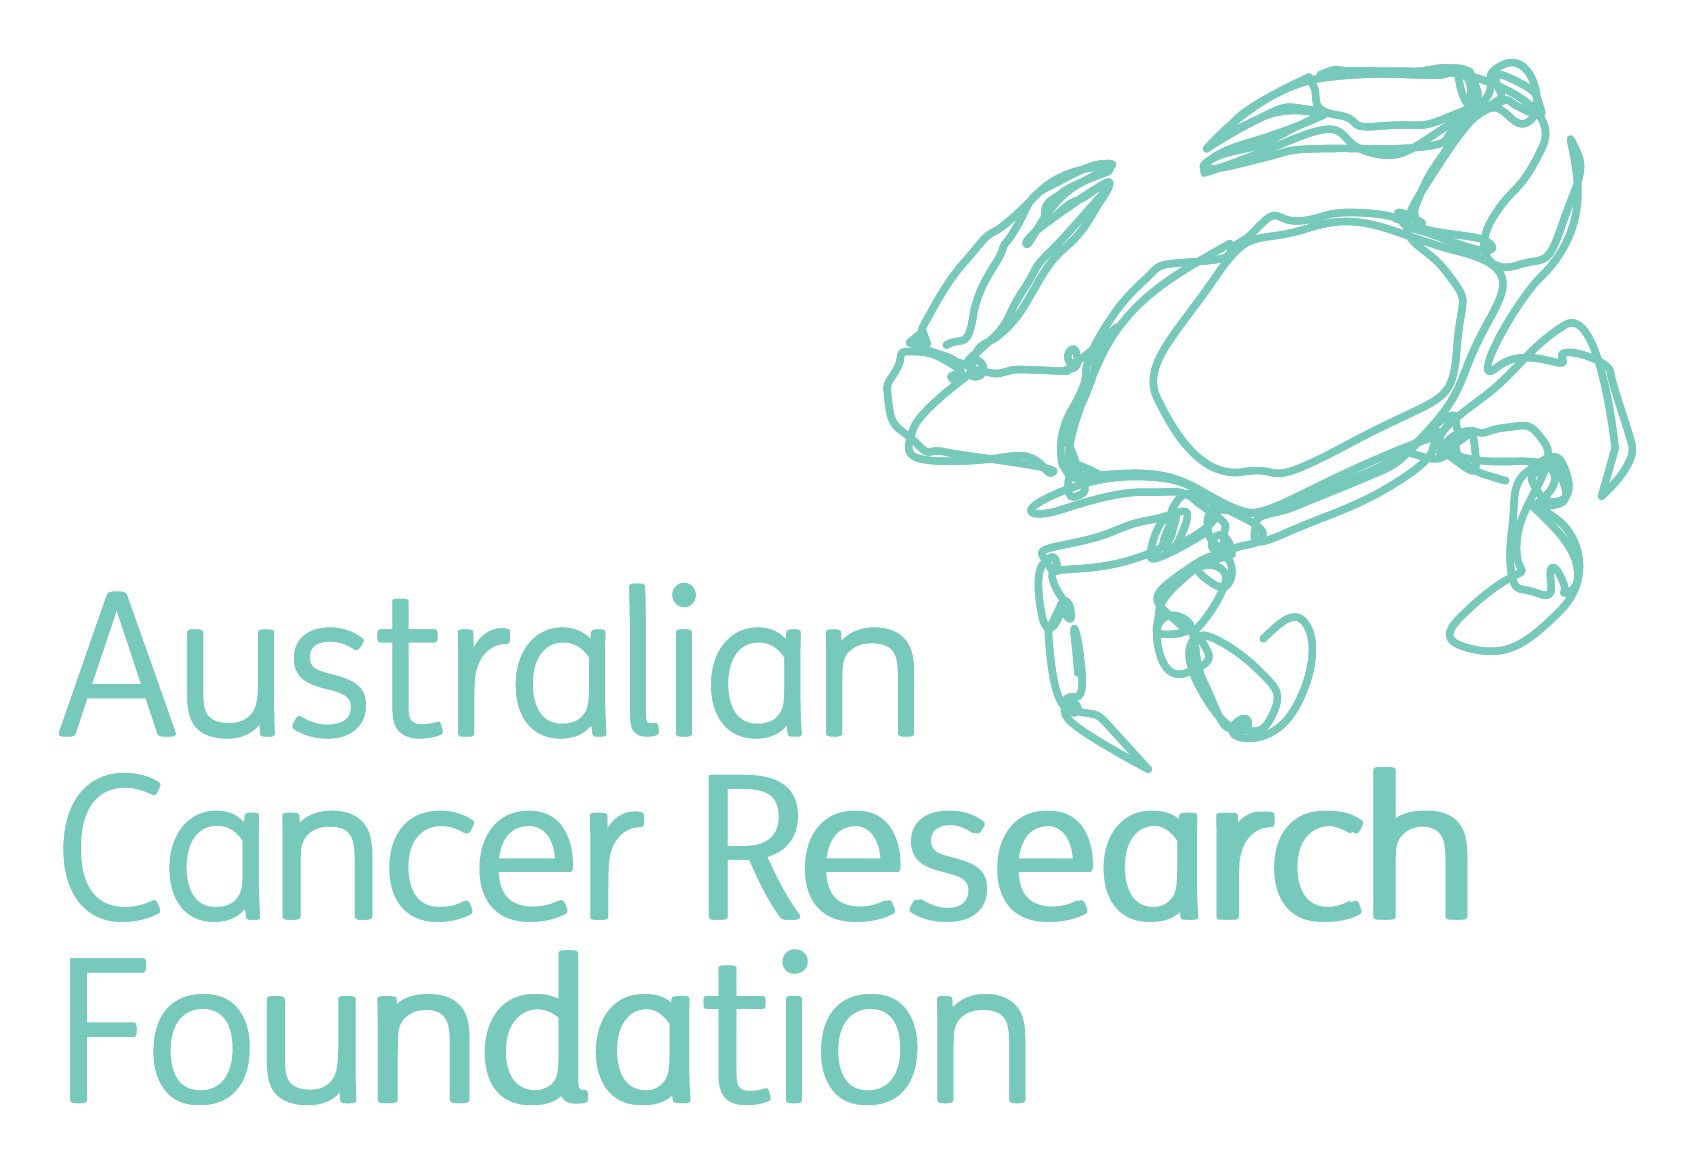 AWC have chosen the Australian Cancer Research Foundation (ACRF) as our charity of choice for 2013